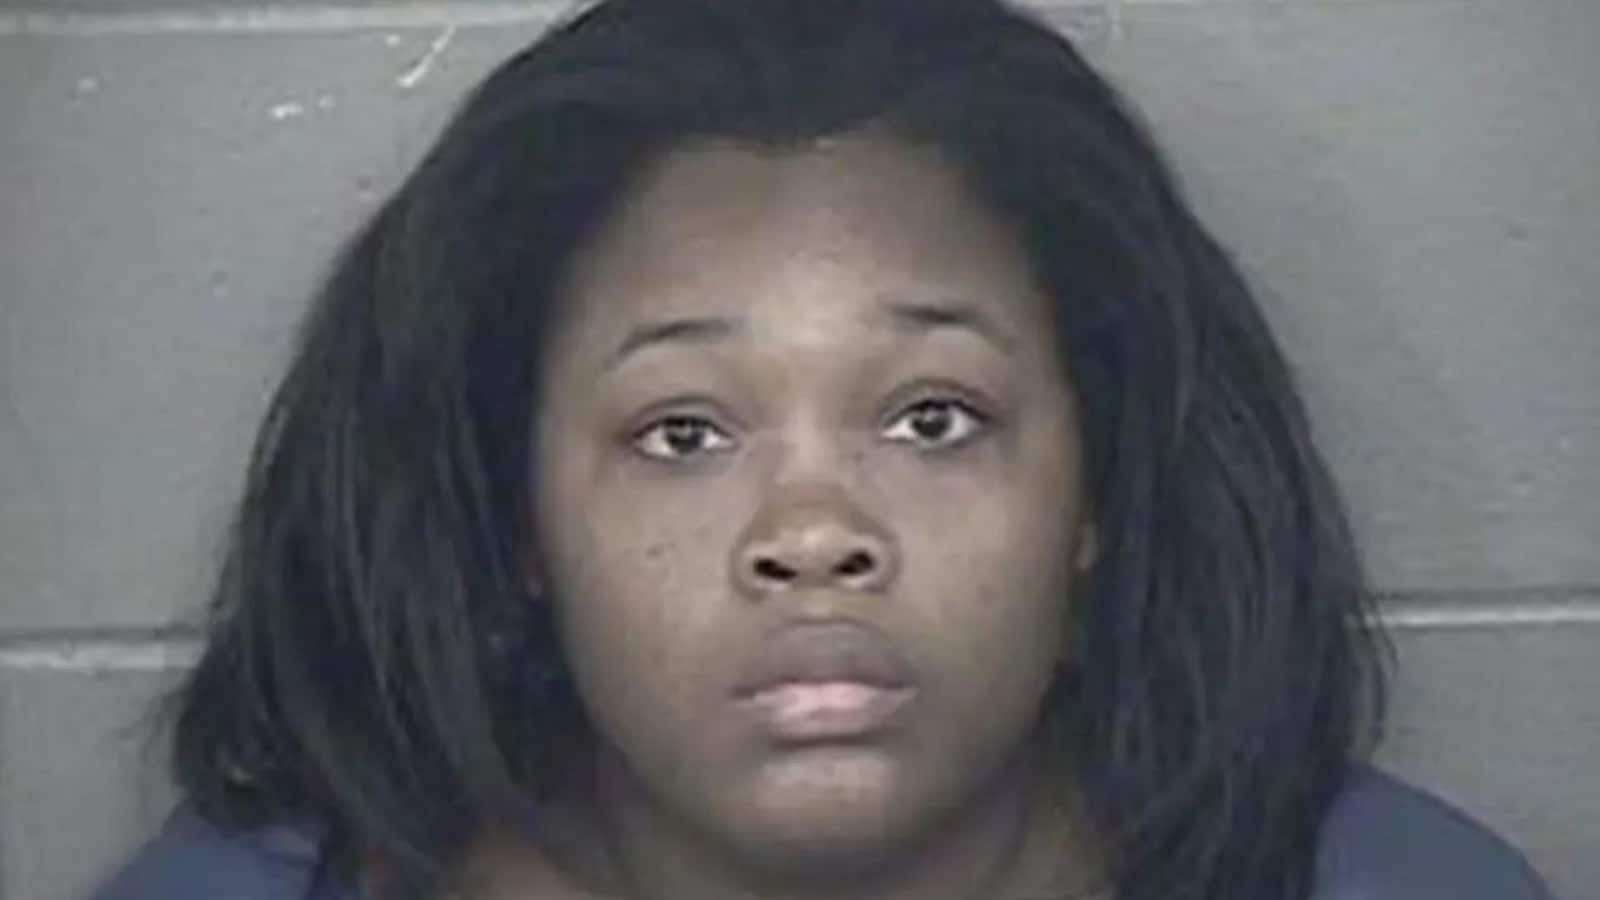 Infant dies after Missouri mom puts her in oven, claims she mistook cooker for crib